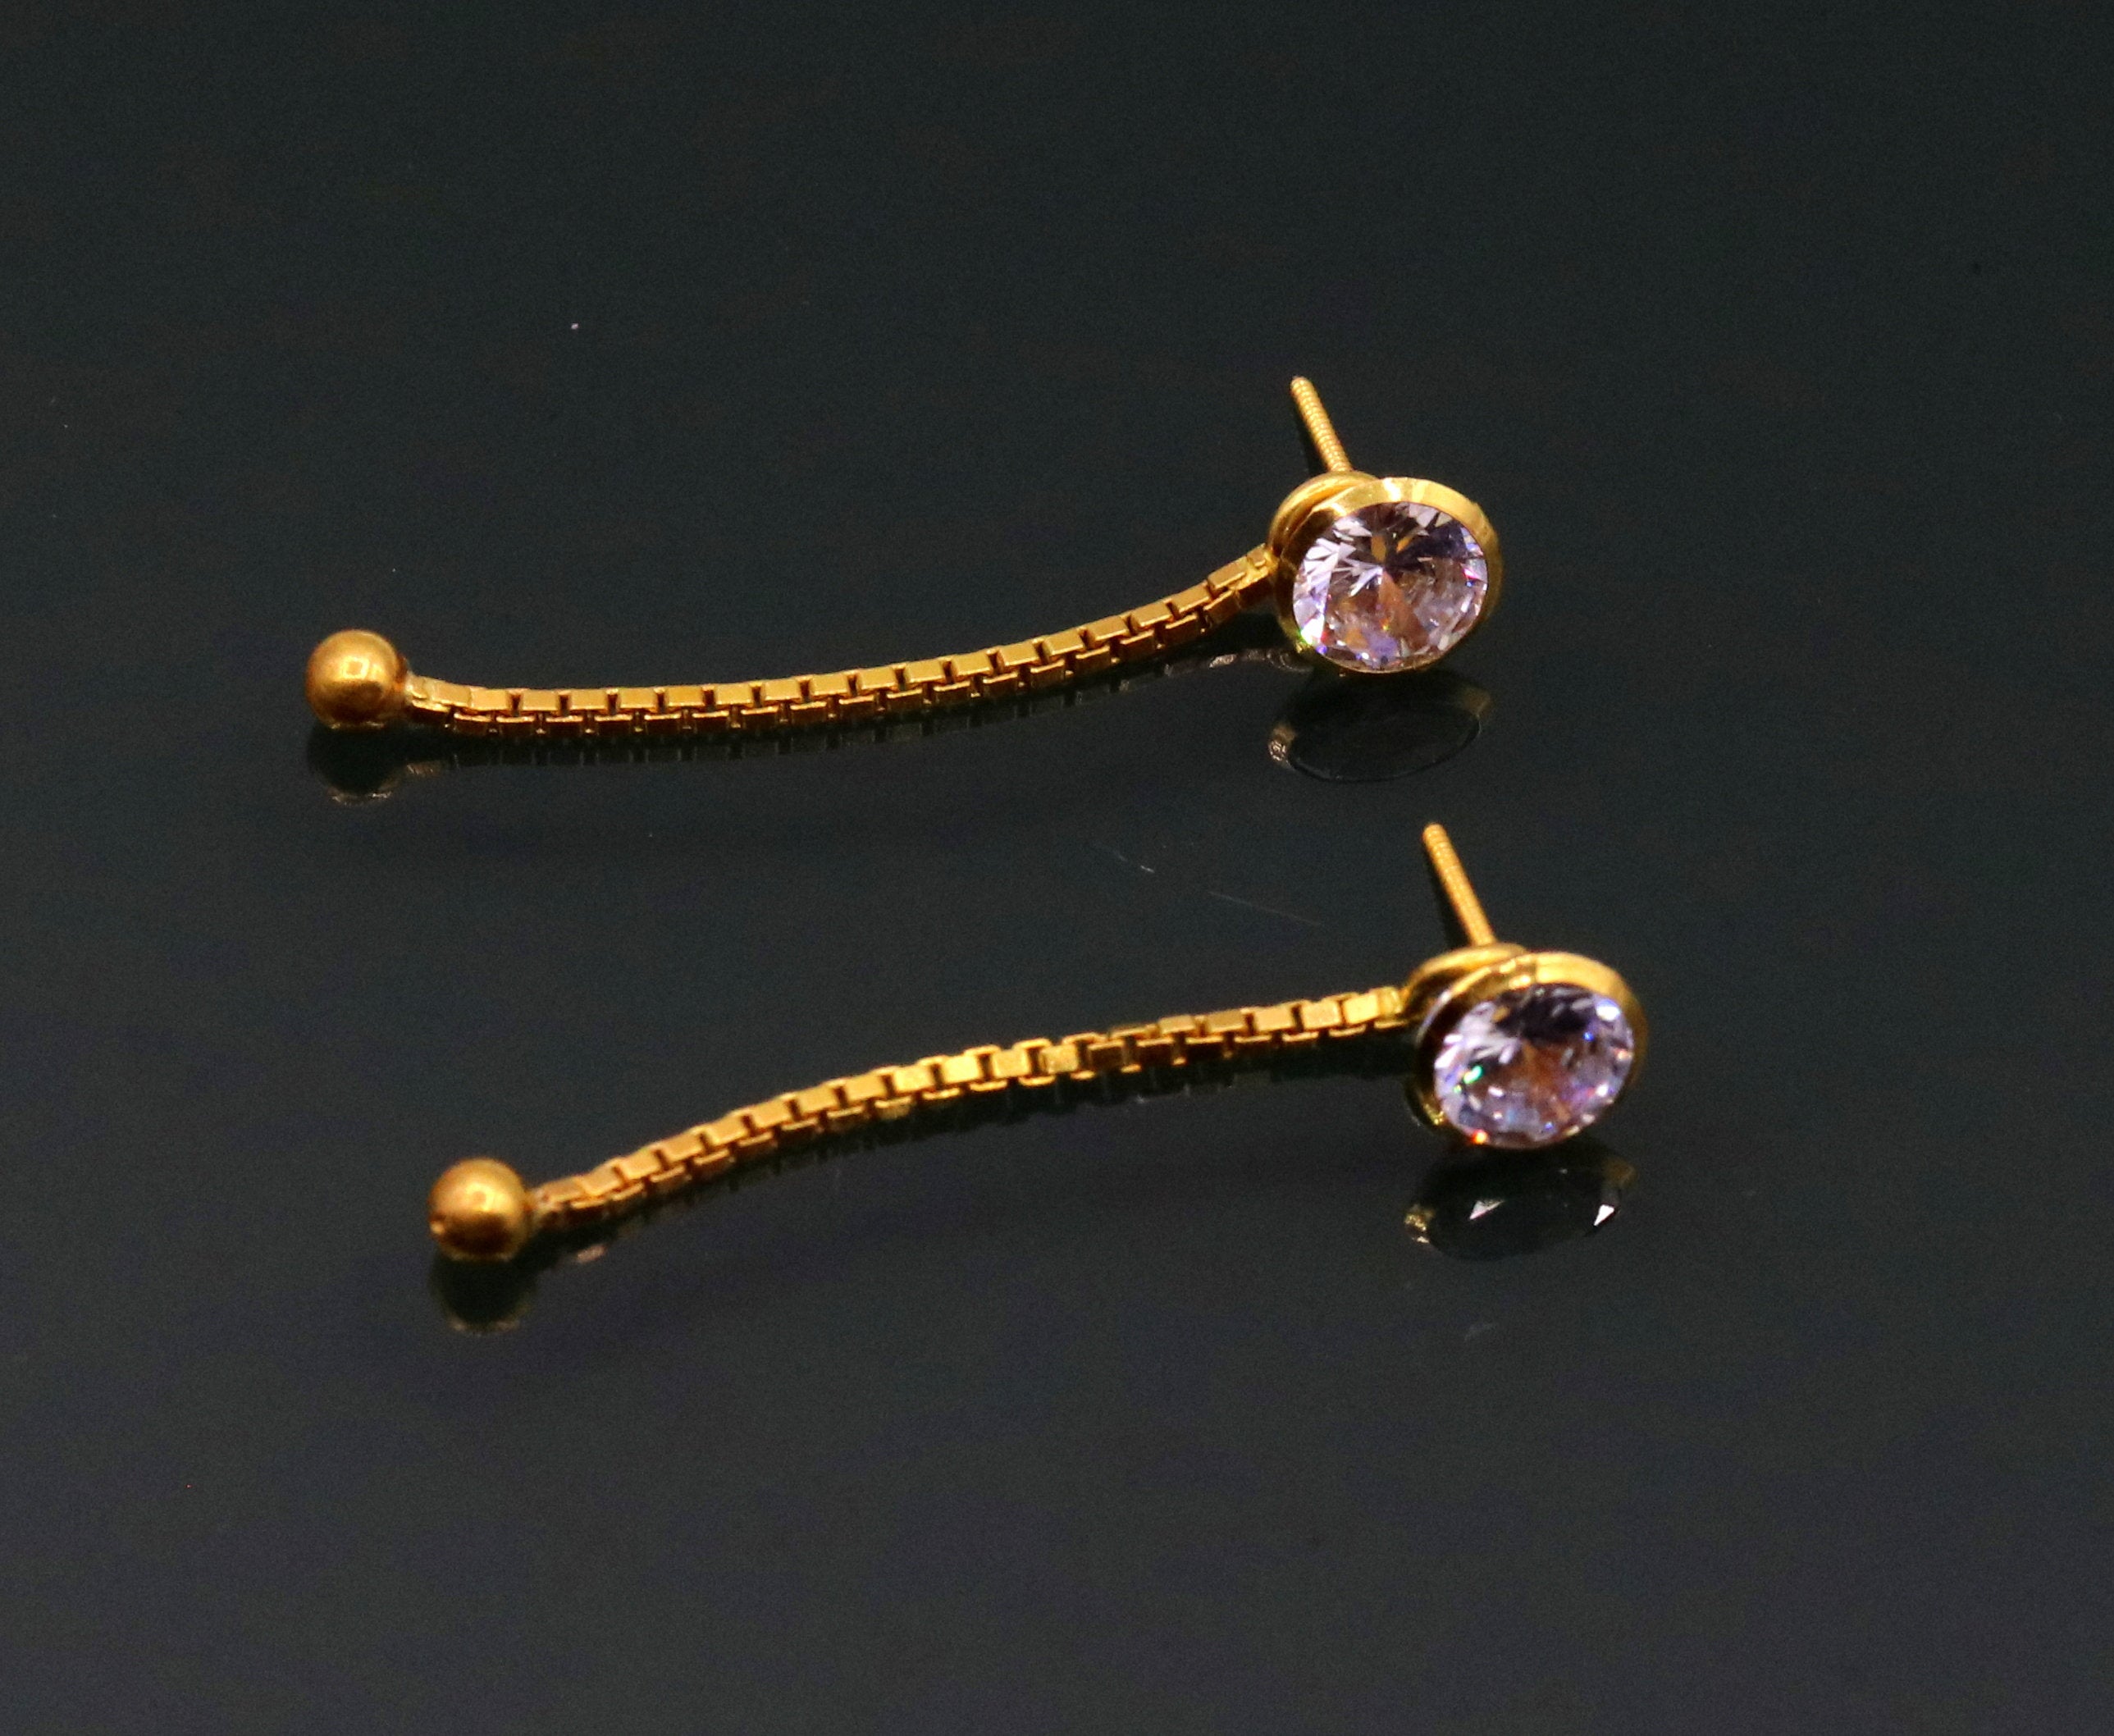 Double Chain Connector Earring – Studs